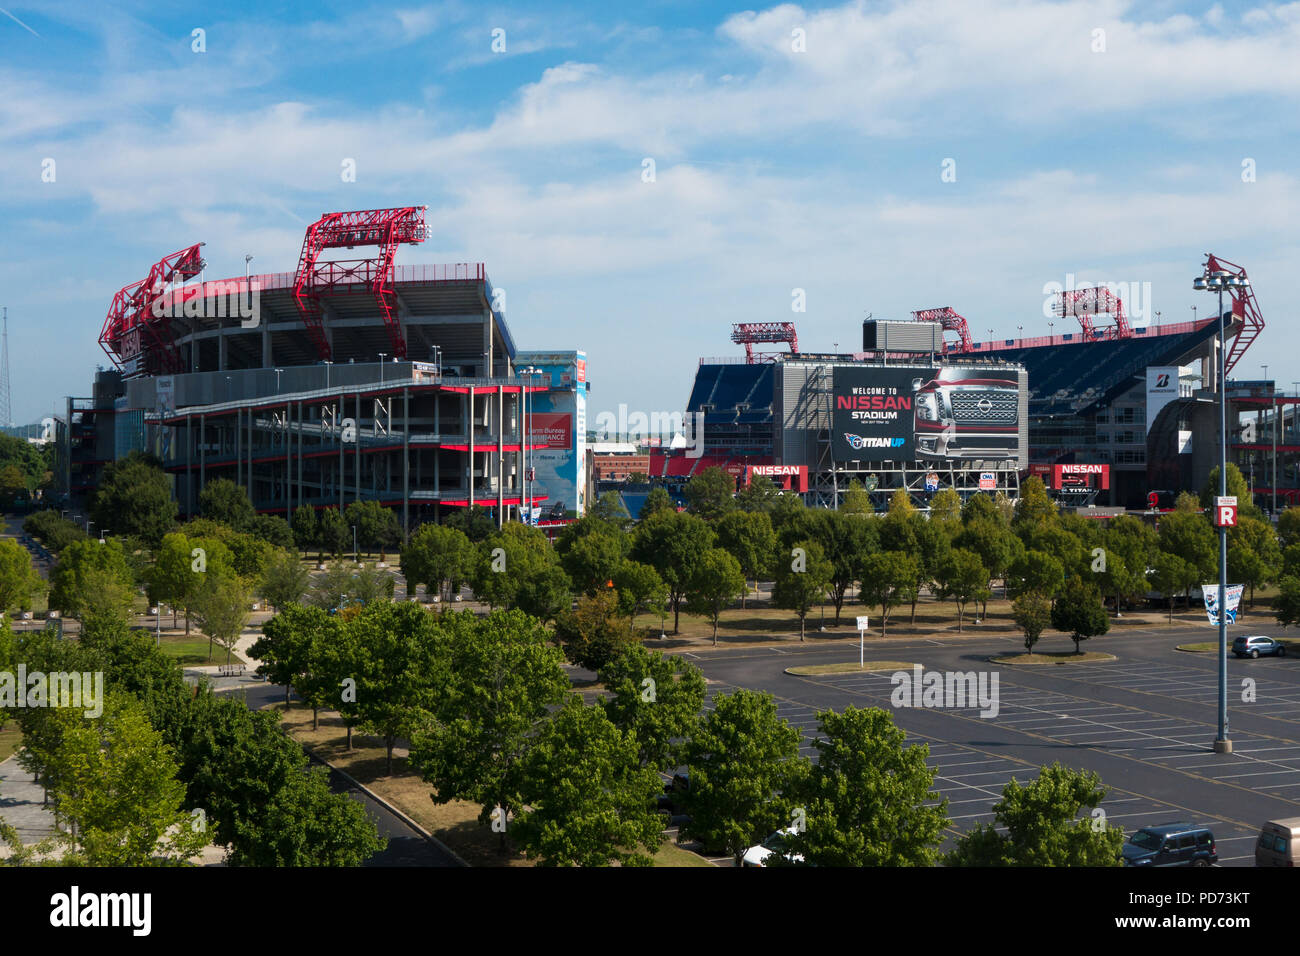 Nissan Stadium in Nashville, Tennessee, USA is the home of the Tennessee Titans NFL football team. Stock Photo